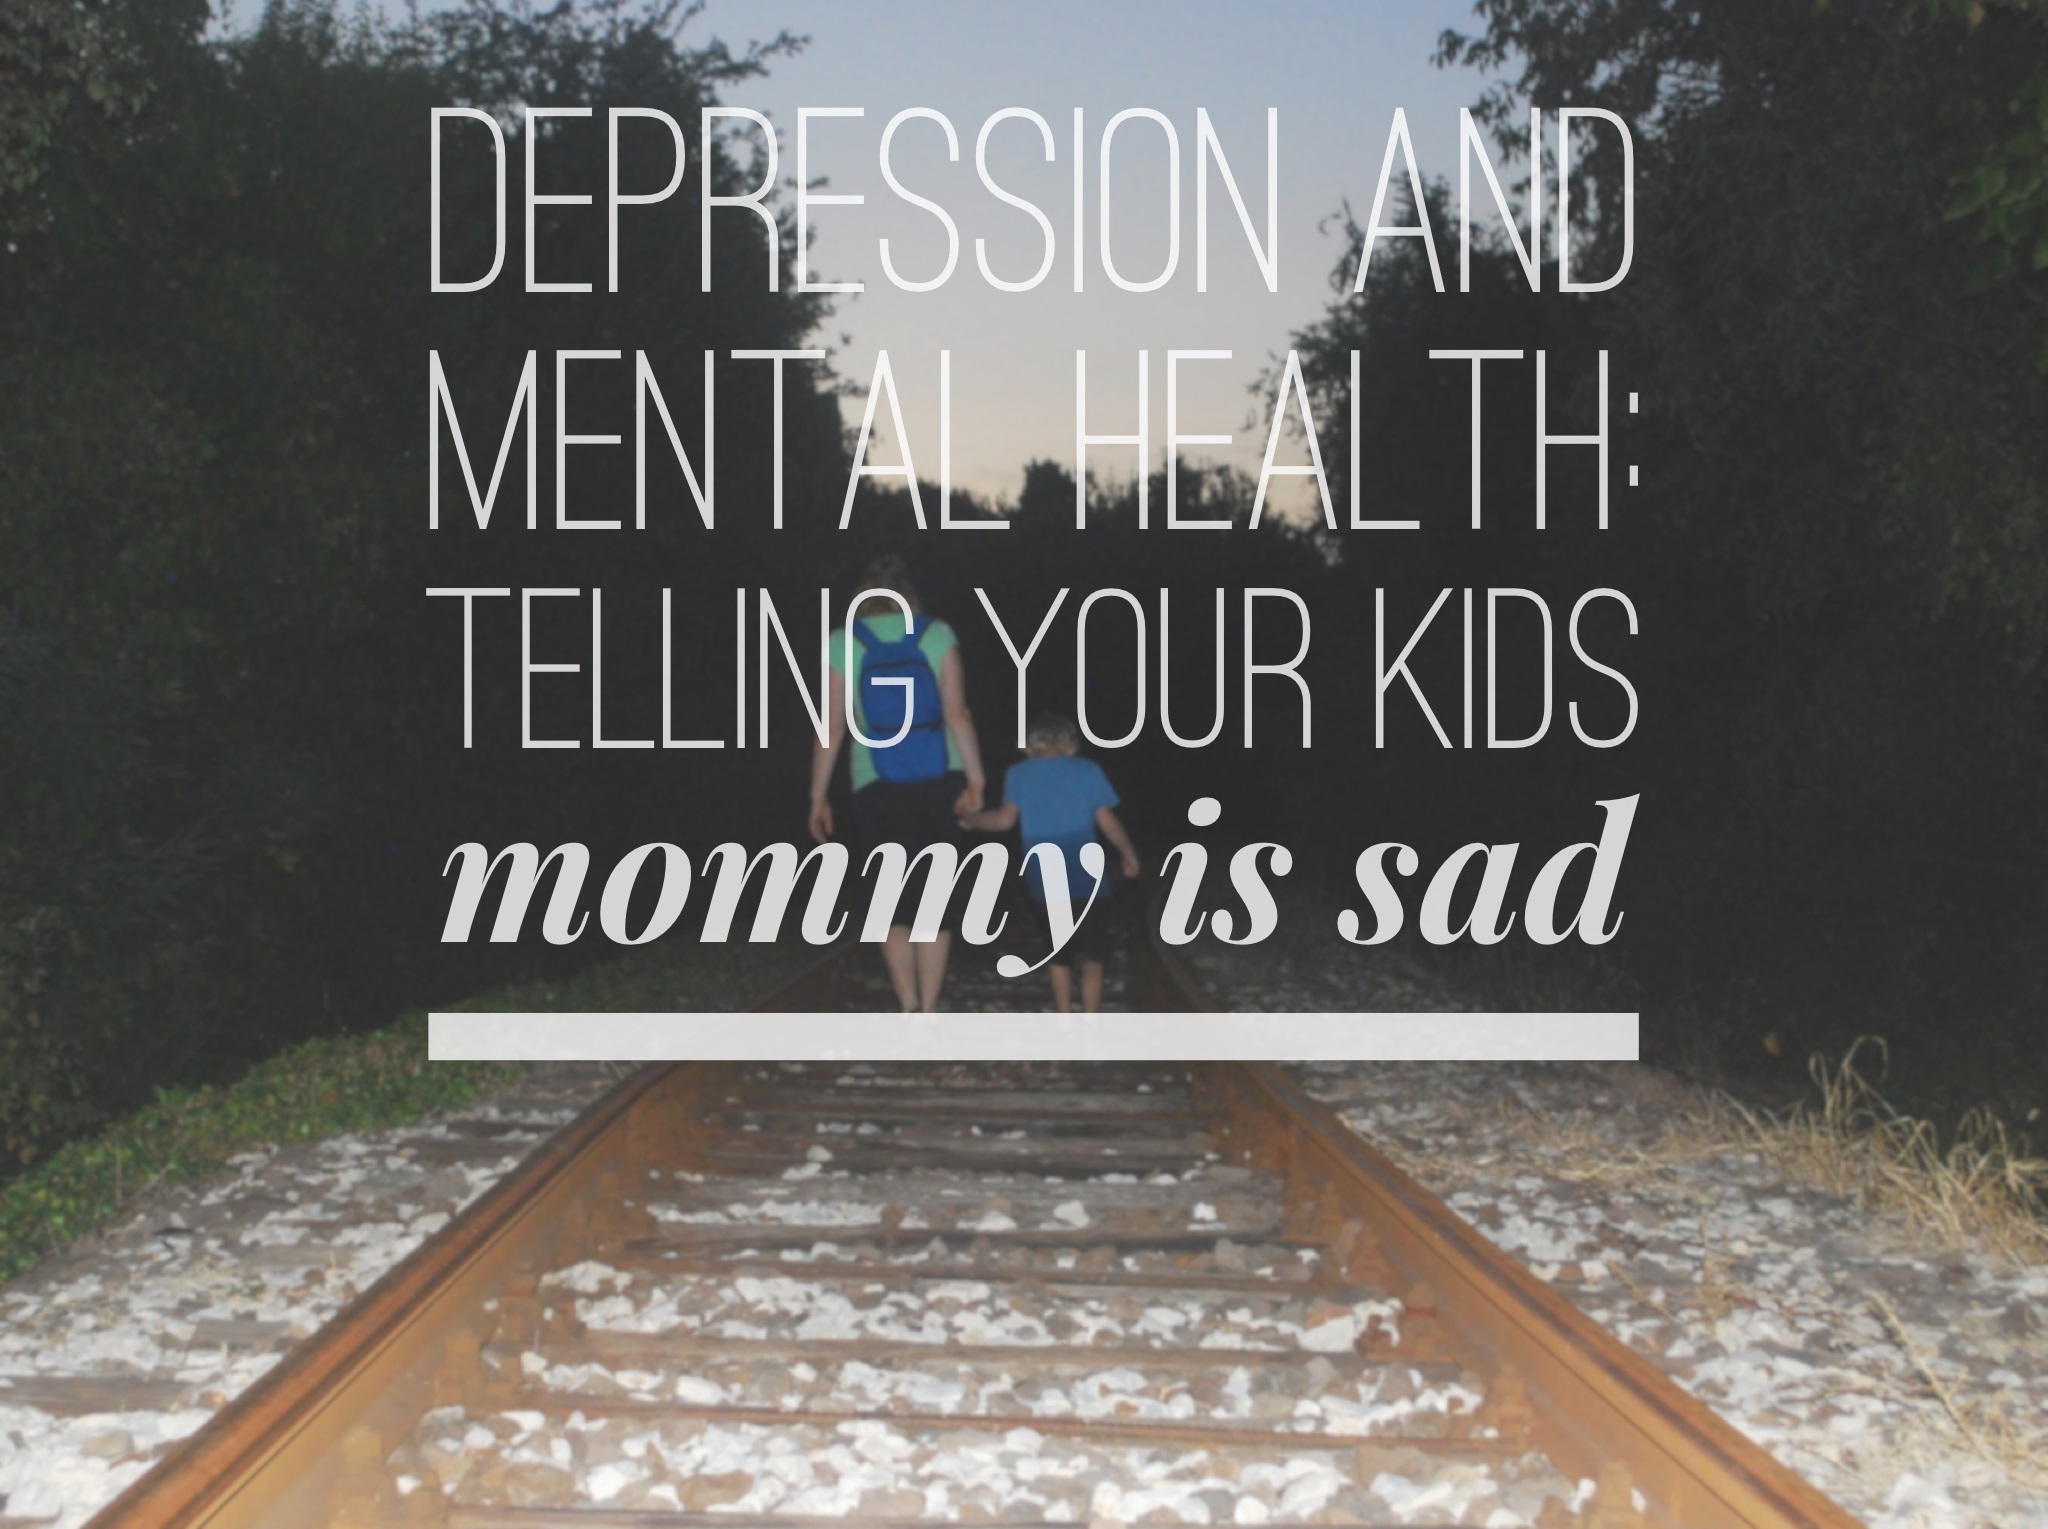 Depression and Mental Health: Telling your kids mommy is sad